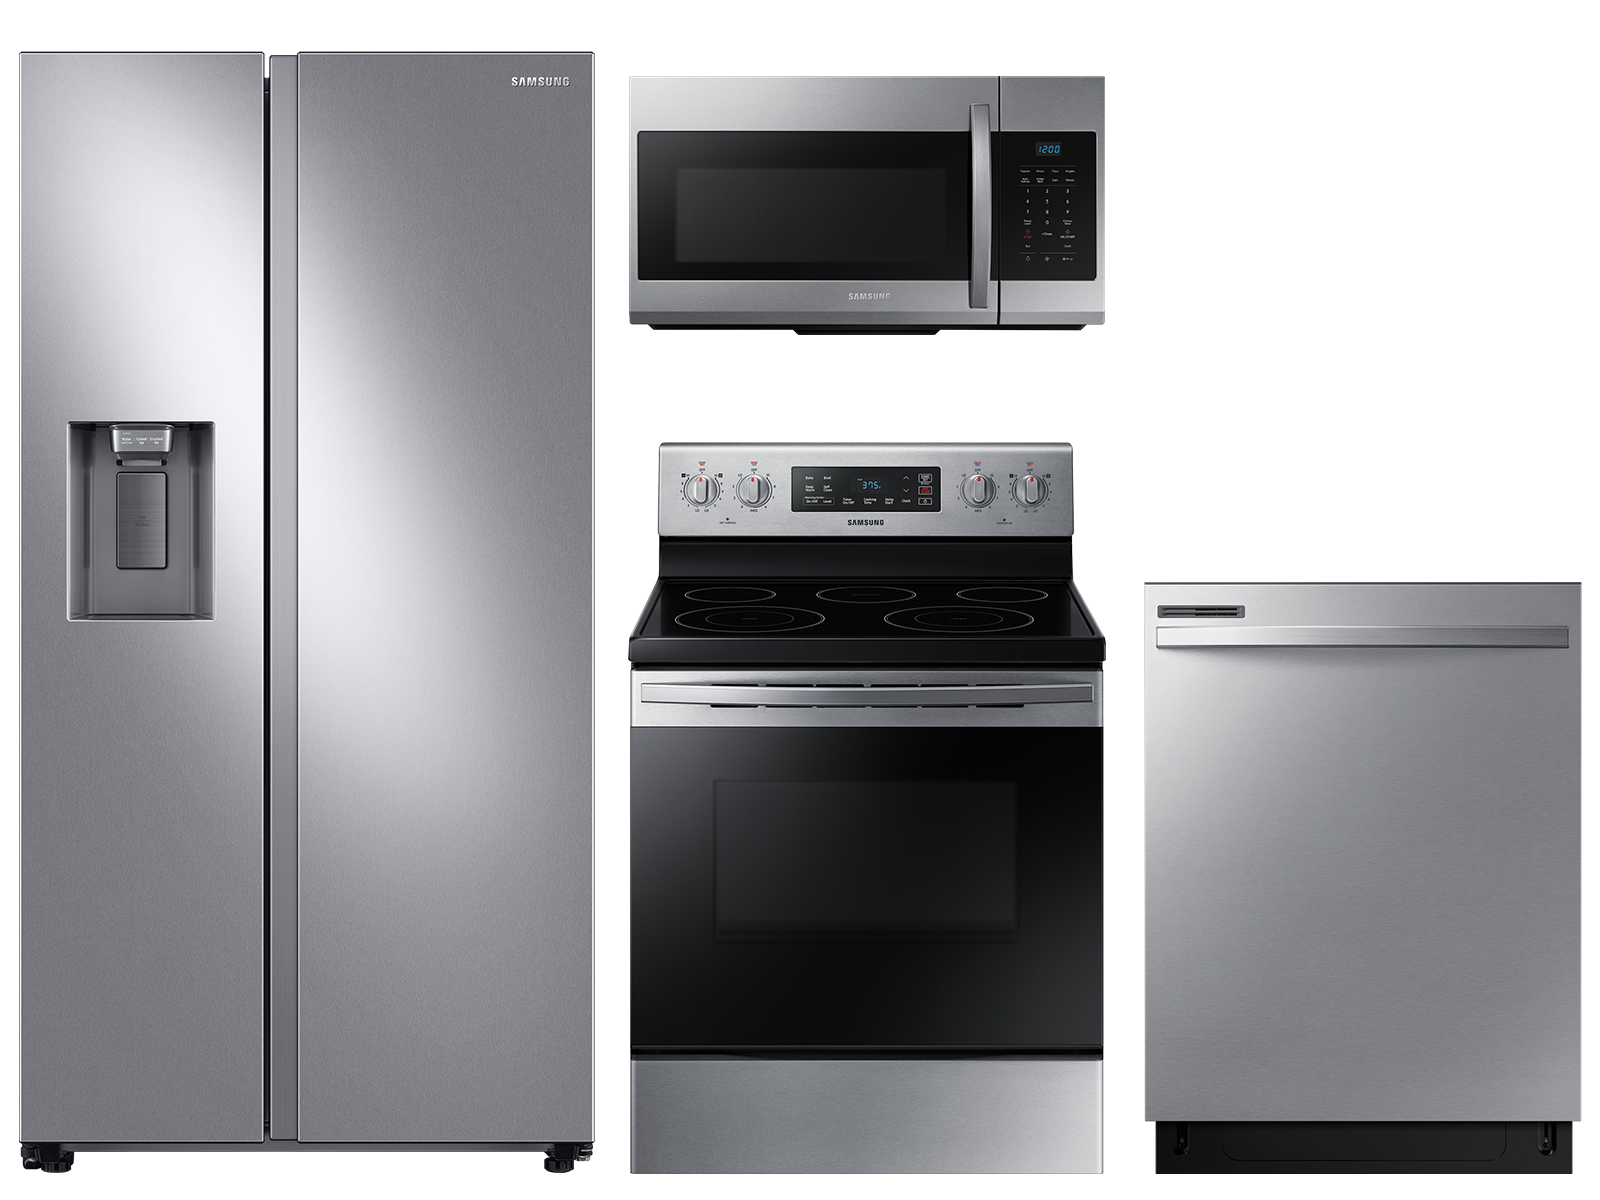 Samsung Large capacity Side-by-Side refrigerator & electric range package in Stainless Steel(BNDL-1646991126714)